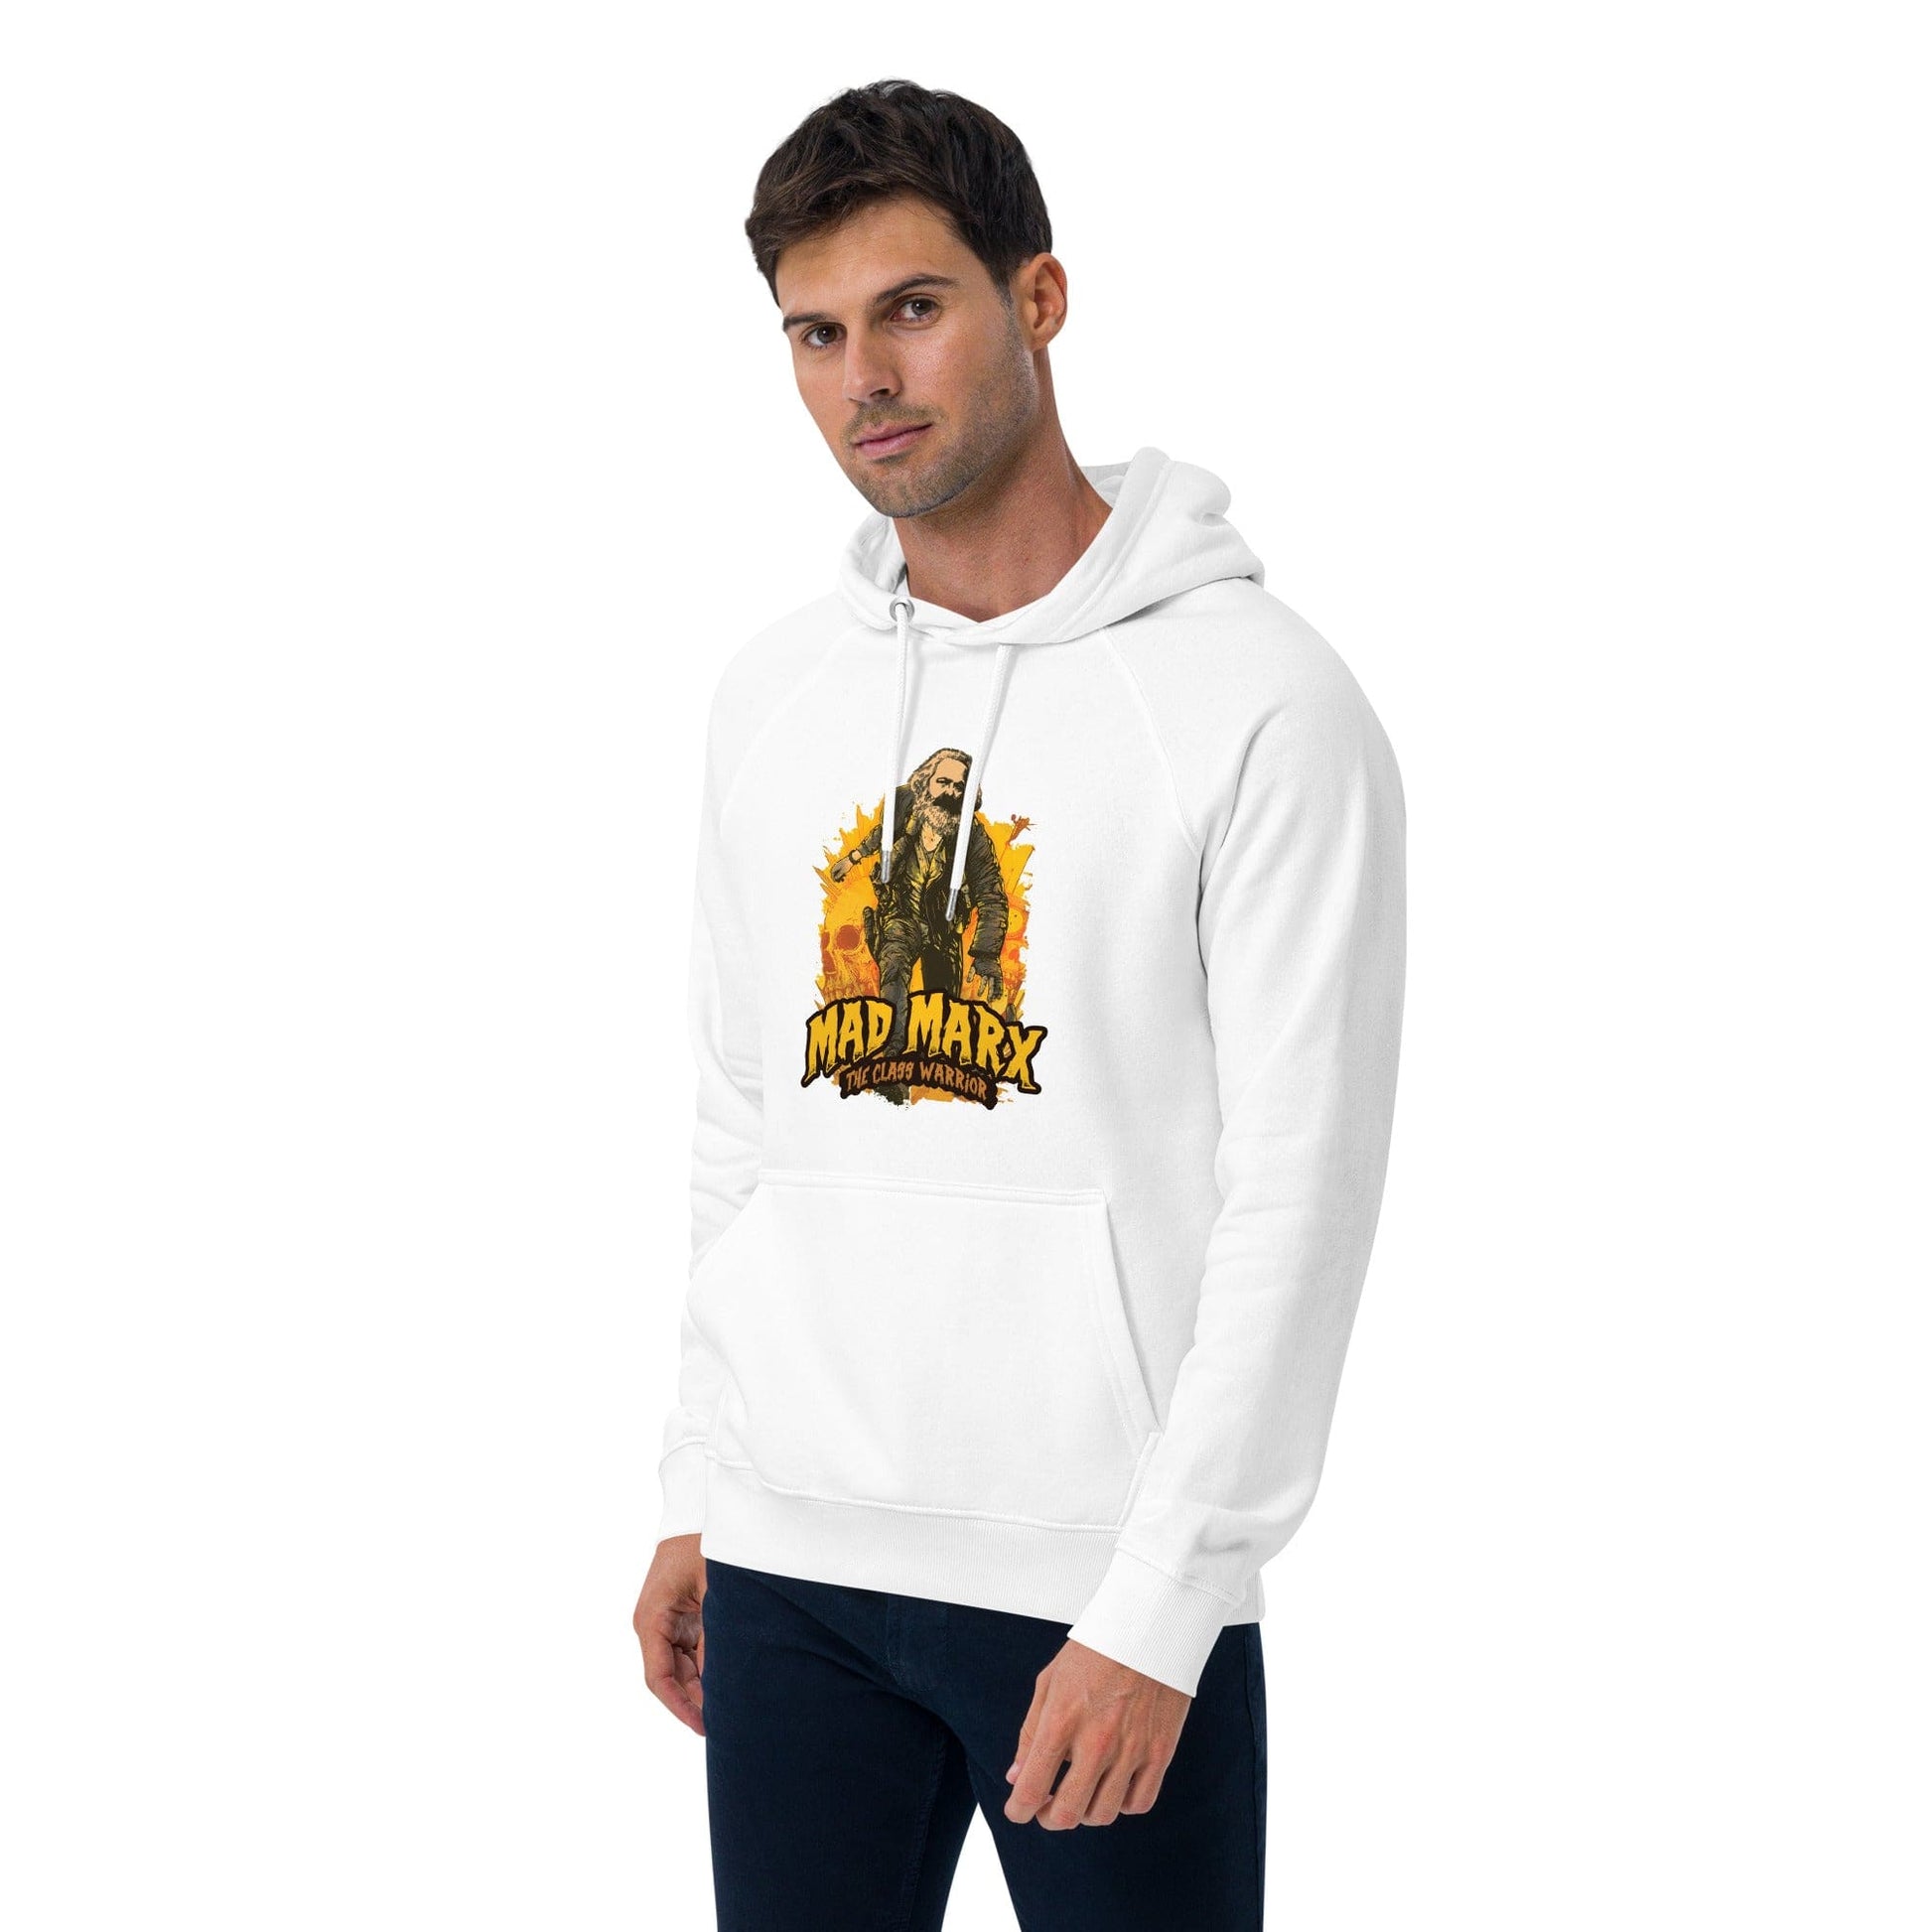 Mad Marx - The Class Warrior - Eco Hoodie